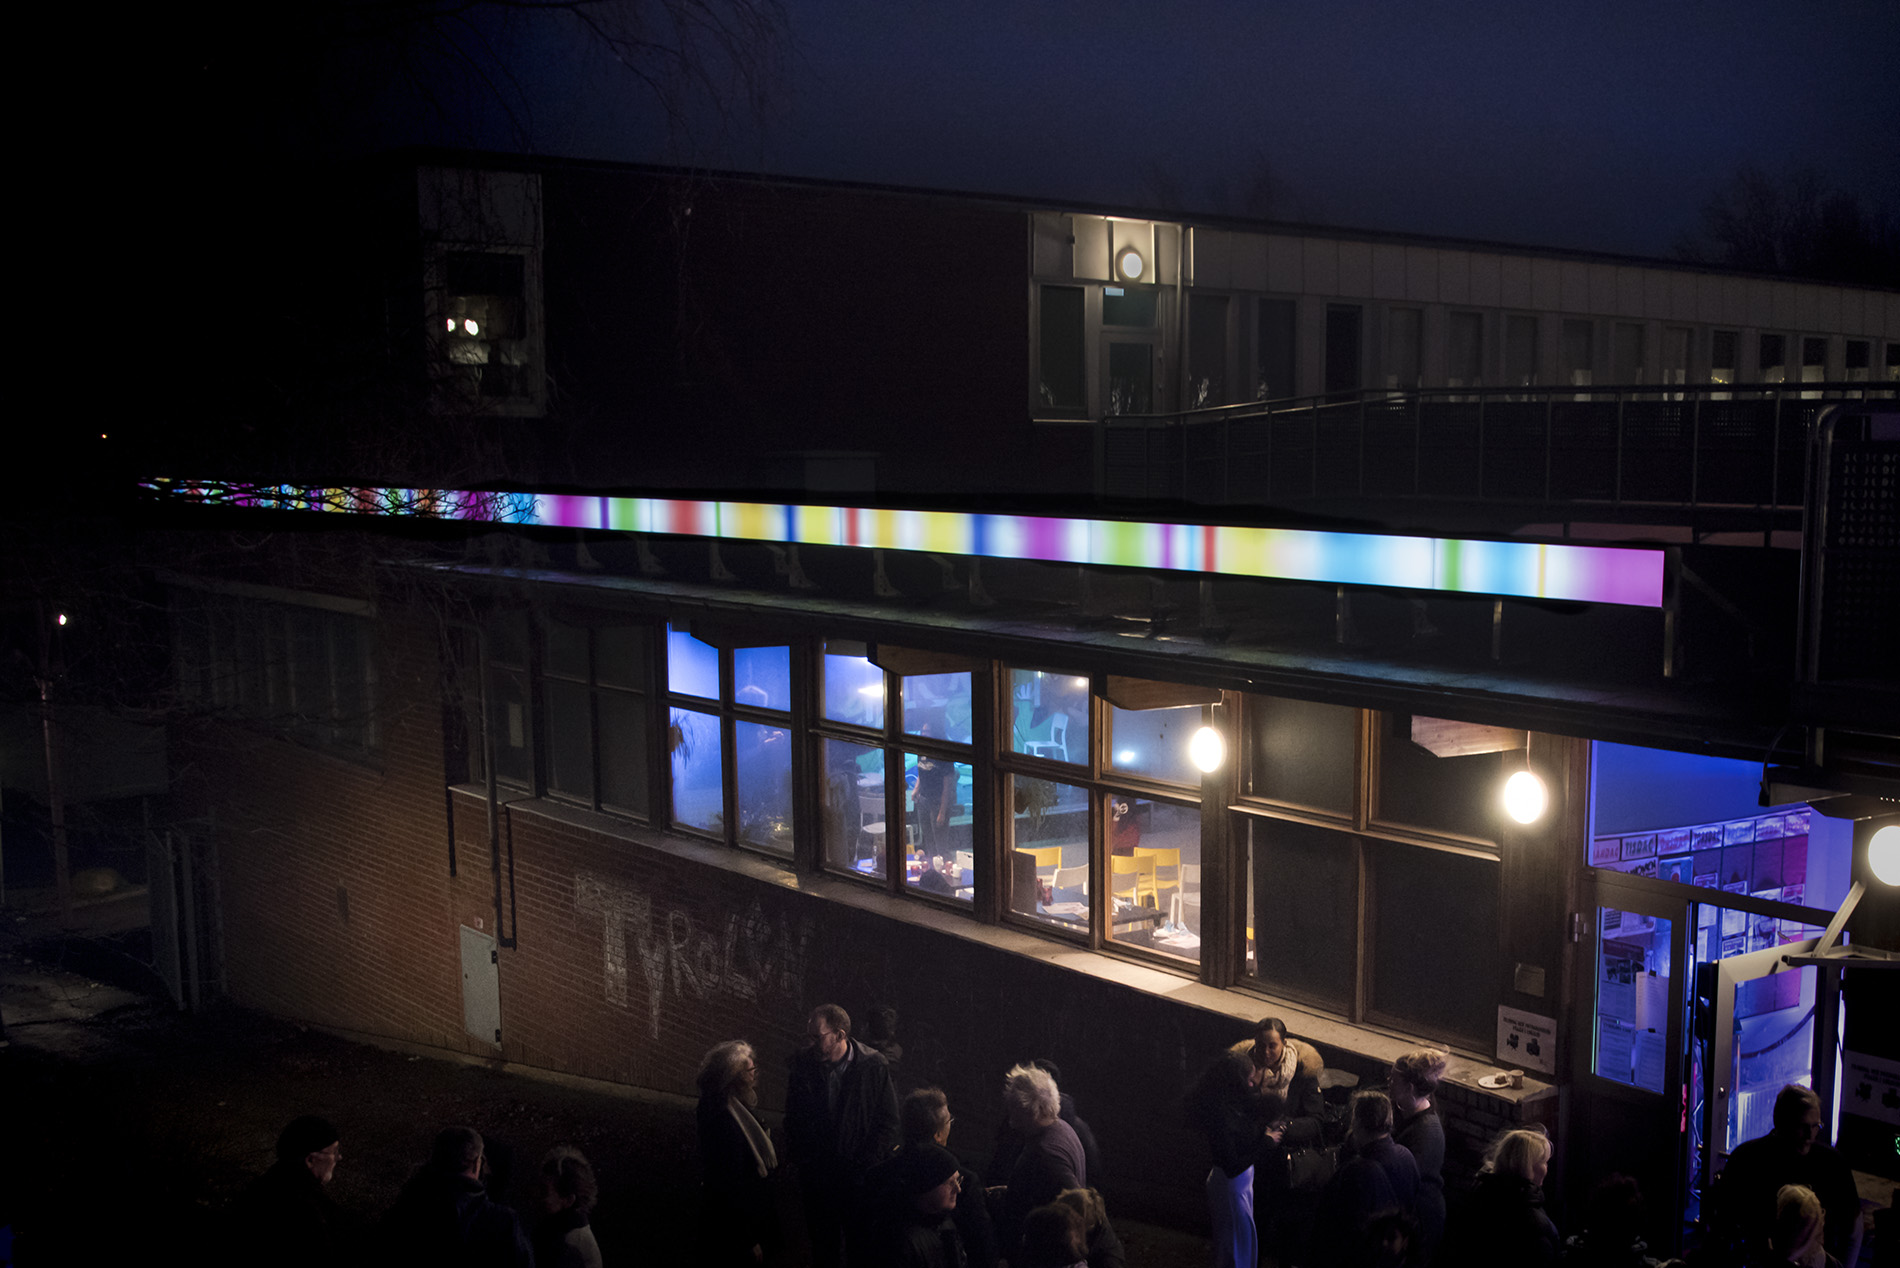 A series of light boxes running across the facade of a brick wall. Shot at night, when the artwork is light.